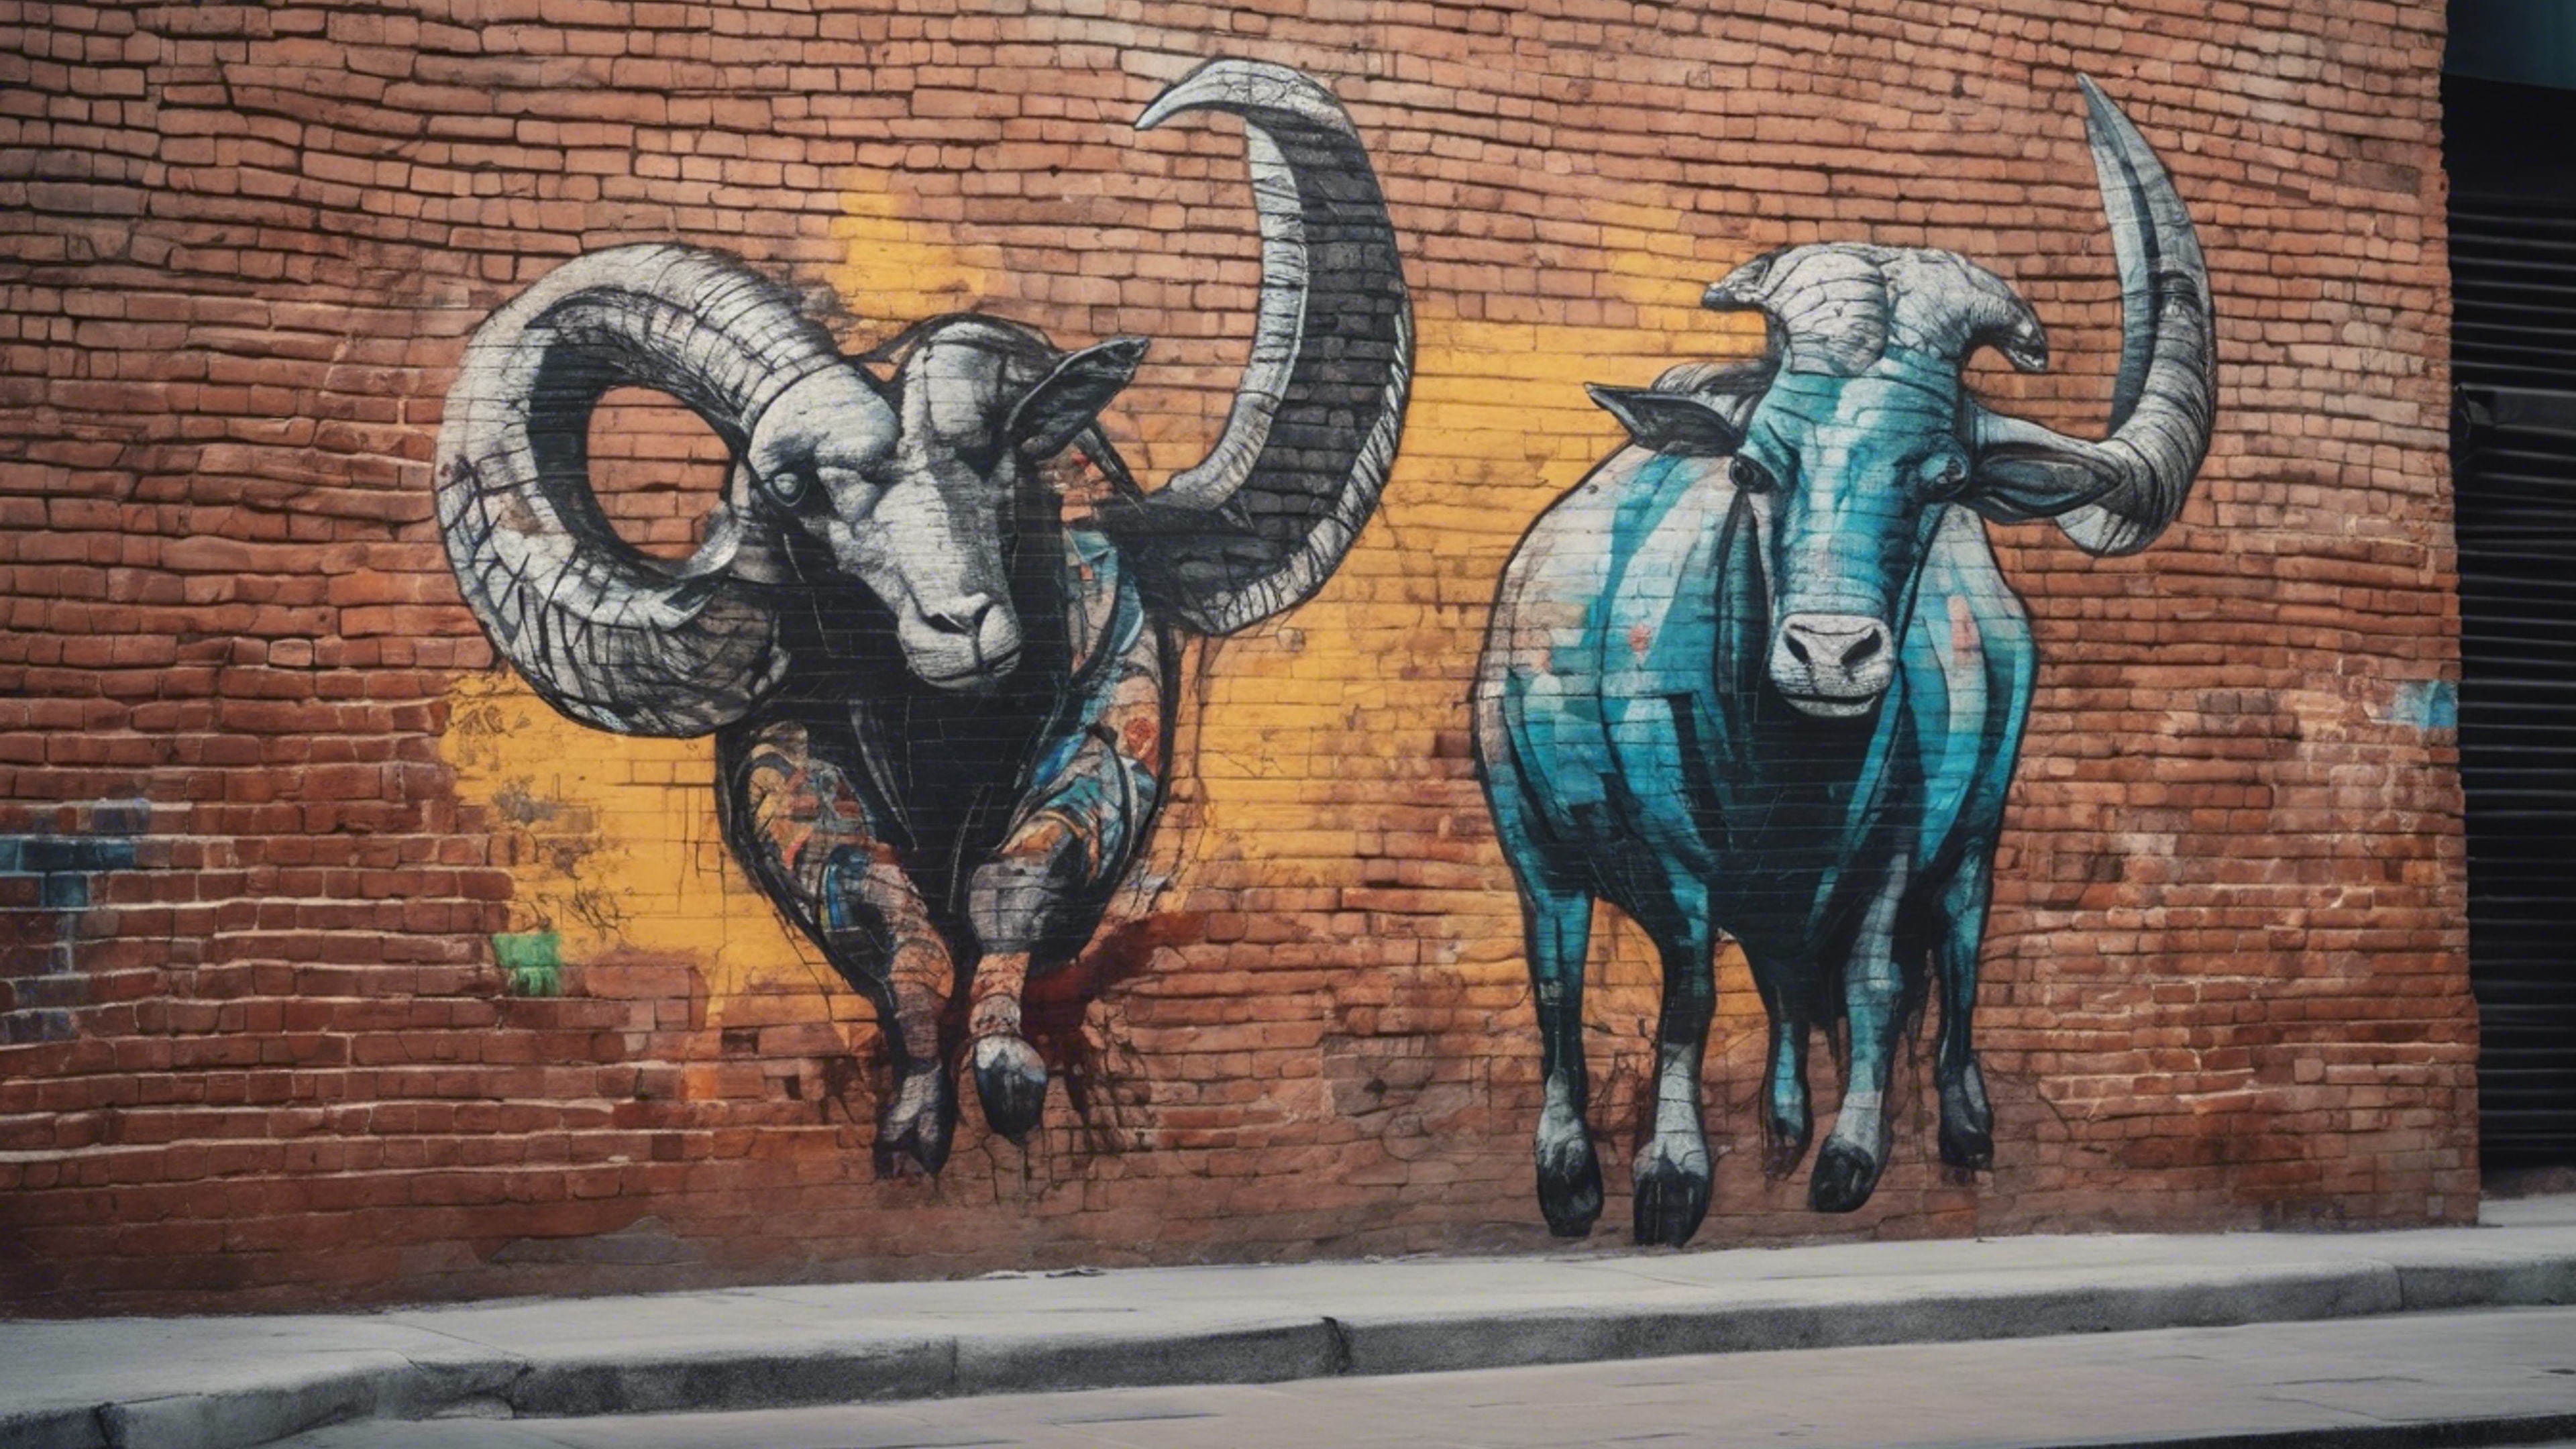 A Capricorn painted as street art on a brick wall in a busy city street. Wallpaper[8124c45194ee4830b5c7]